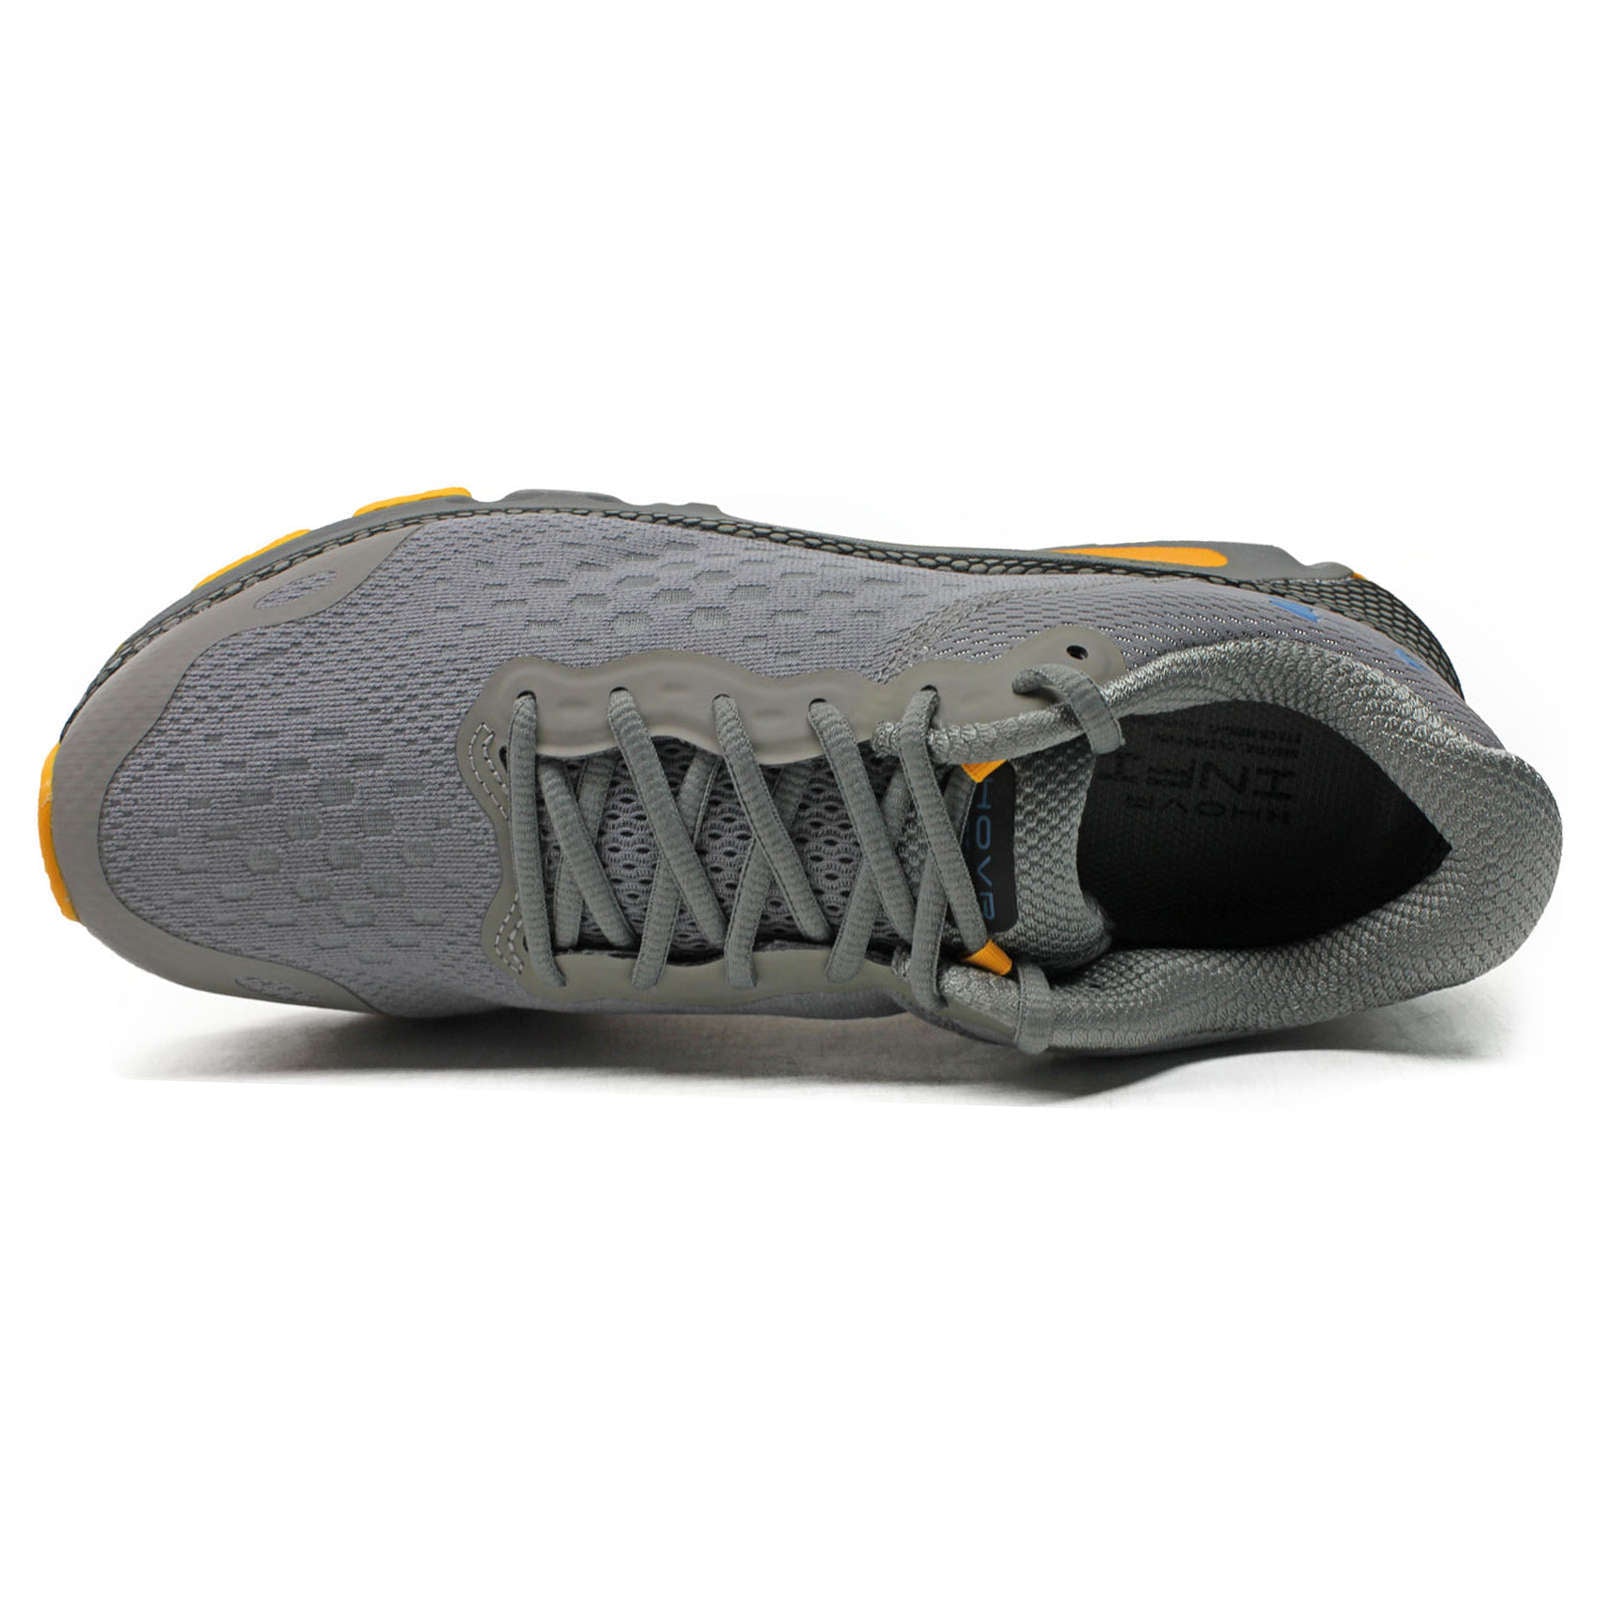 Under Armour HOVR Infinite 3 Synthetic Textile Men's Low-Top Trainers#color_grey grey